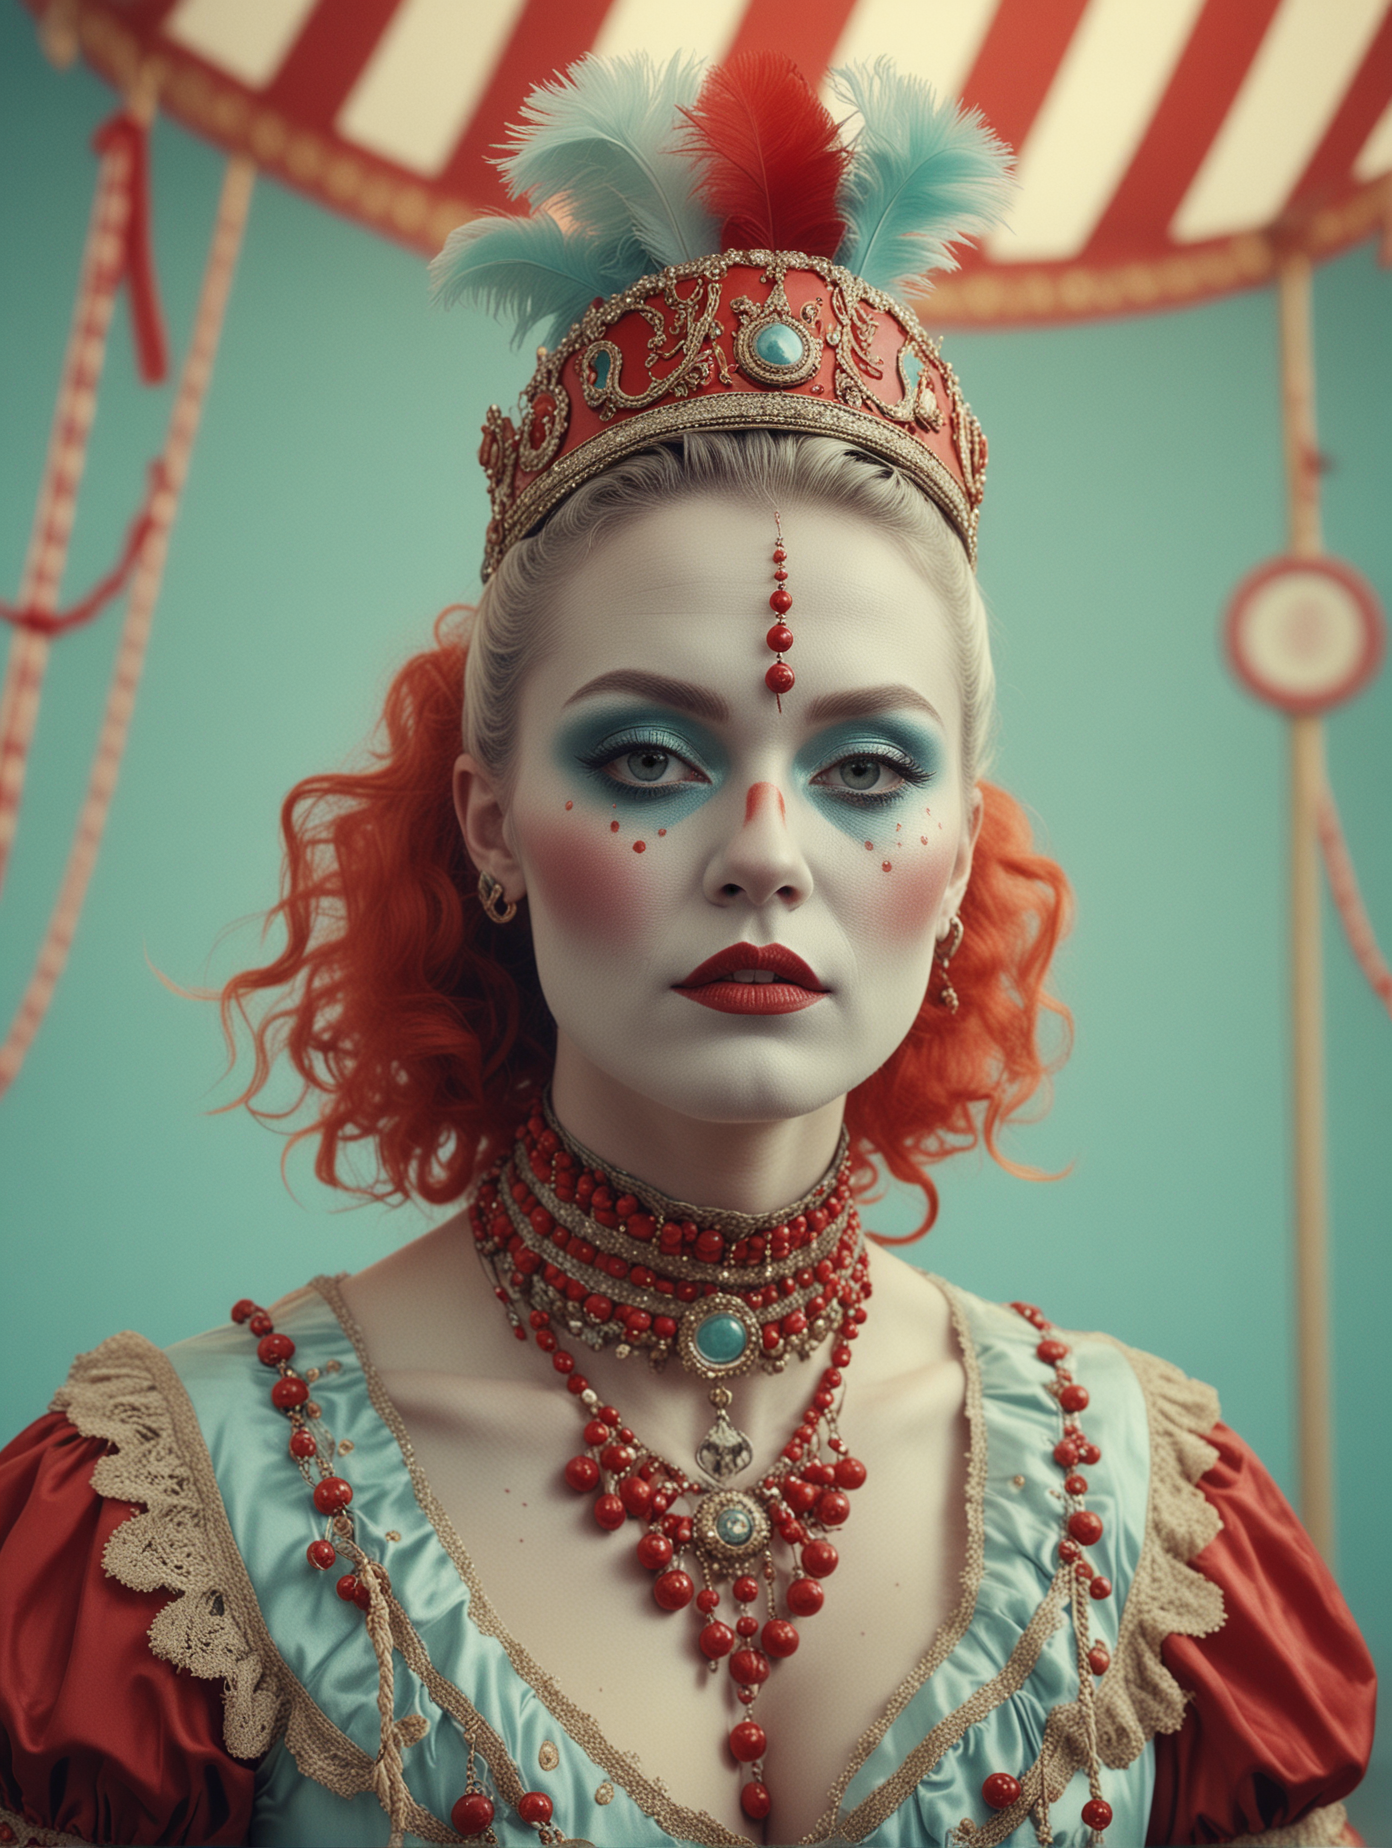 circus, in the style of whimsical yet eerie circus symbolism, light cyan and red palette, close up portraiture, nature-inspired pieces, elaborate costumes, ultra details